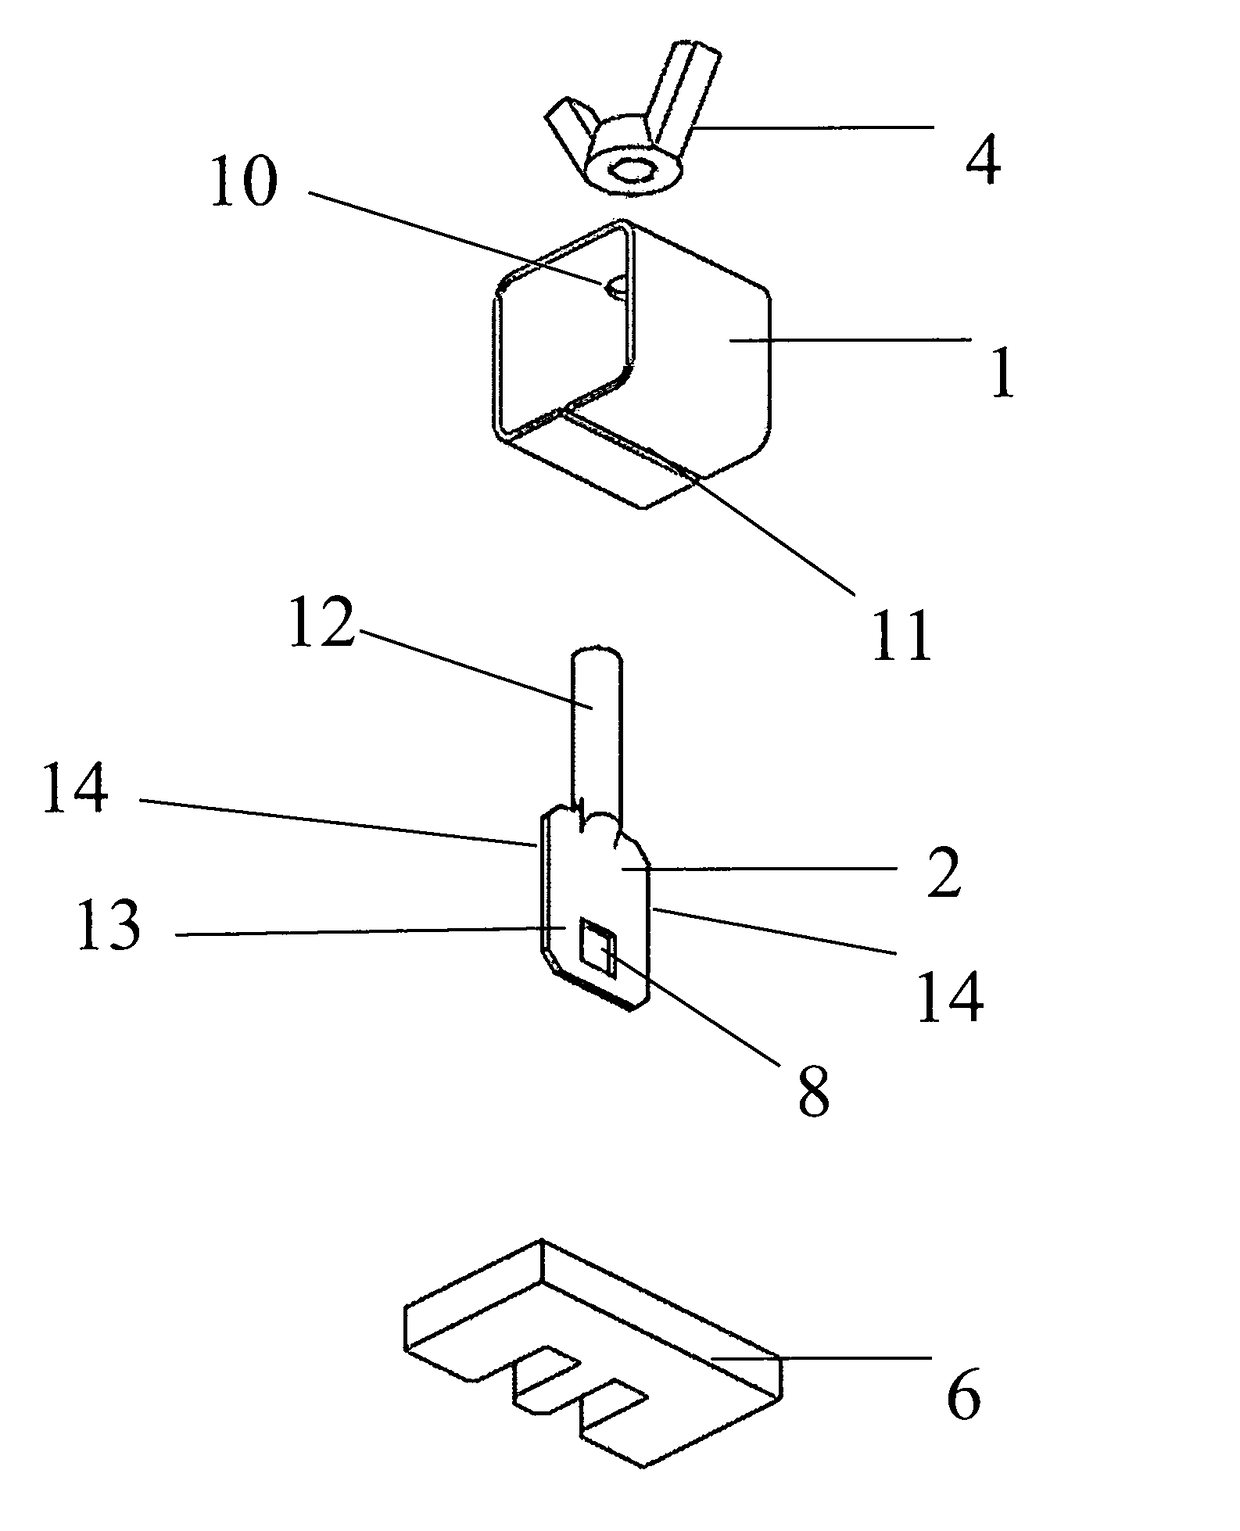 Apparatus for securing sheet metal panels for butt-welding with integral copper backing plate